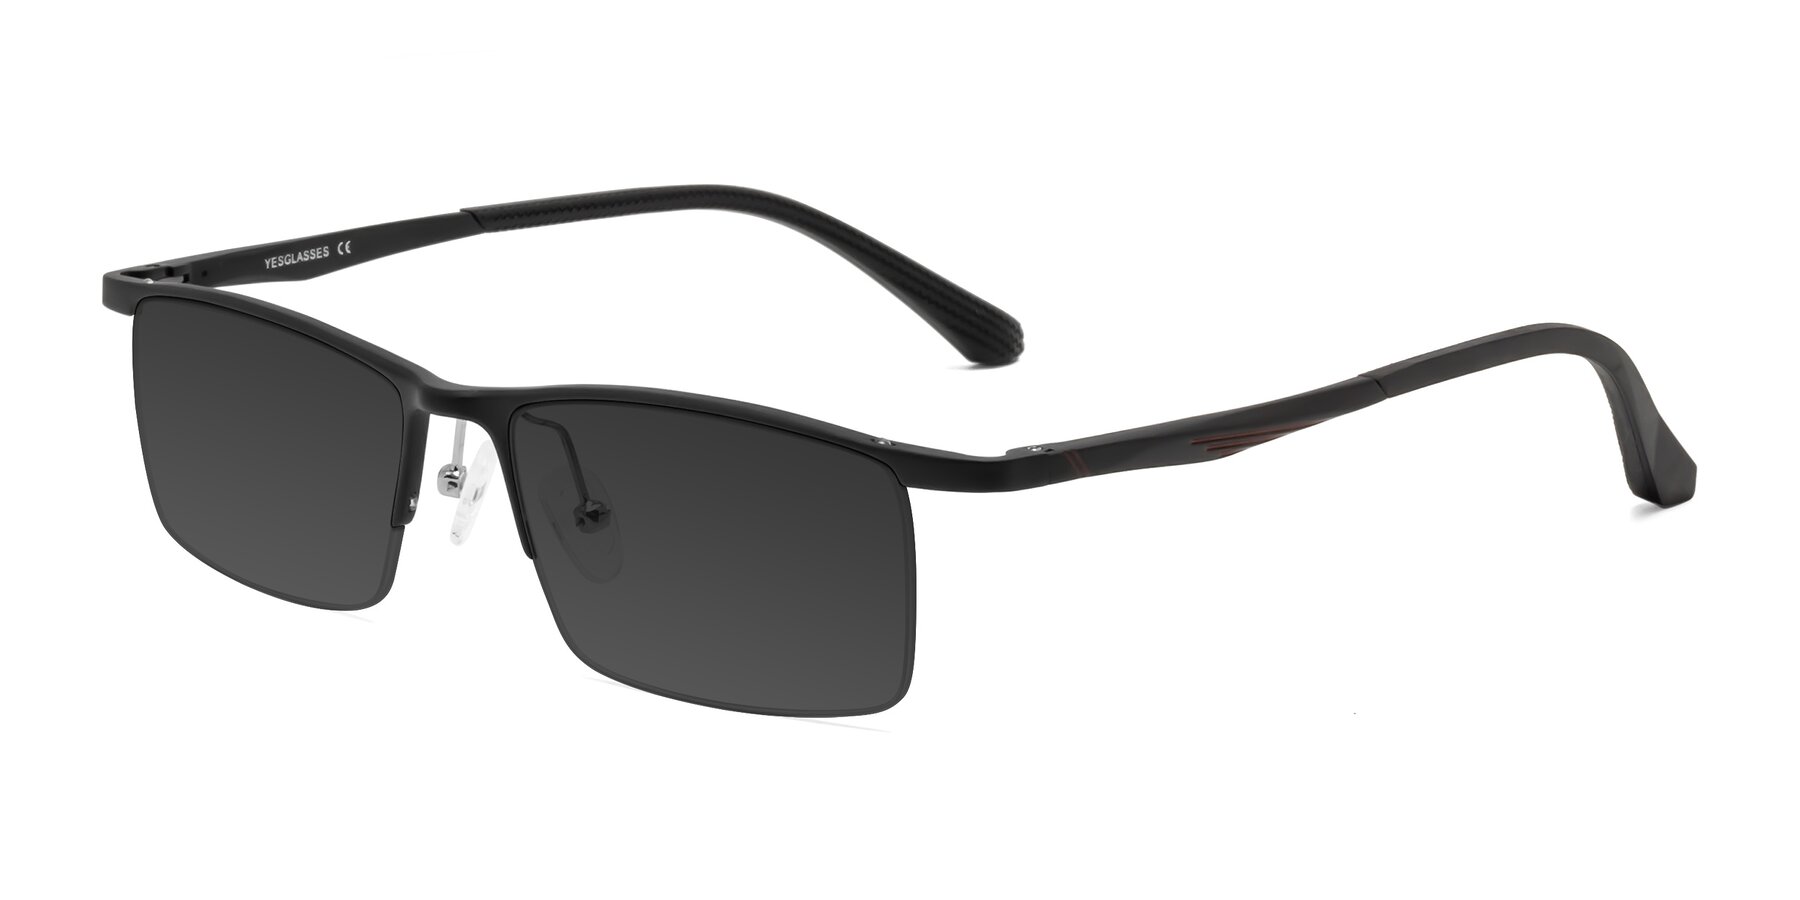 Angle of CX6236 in Black with Gray Tinted Lenses